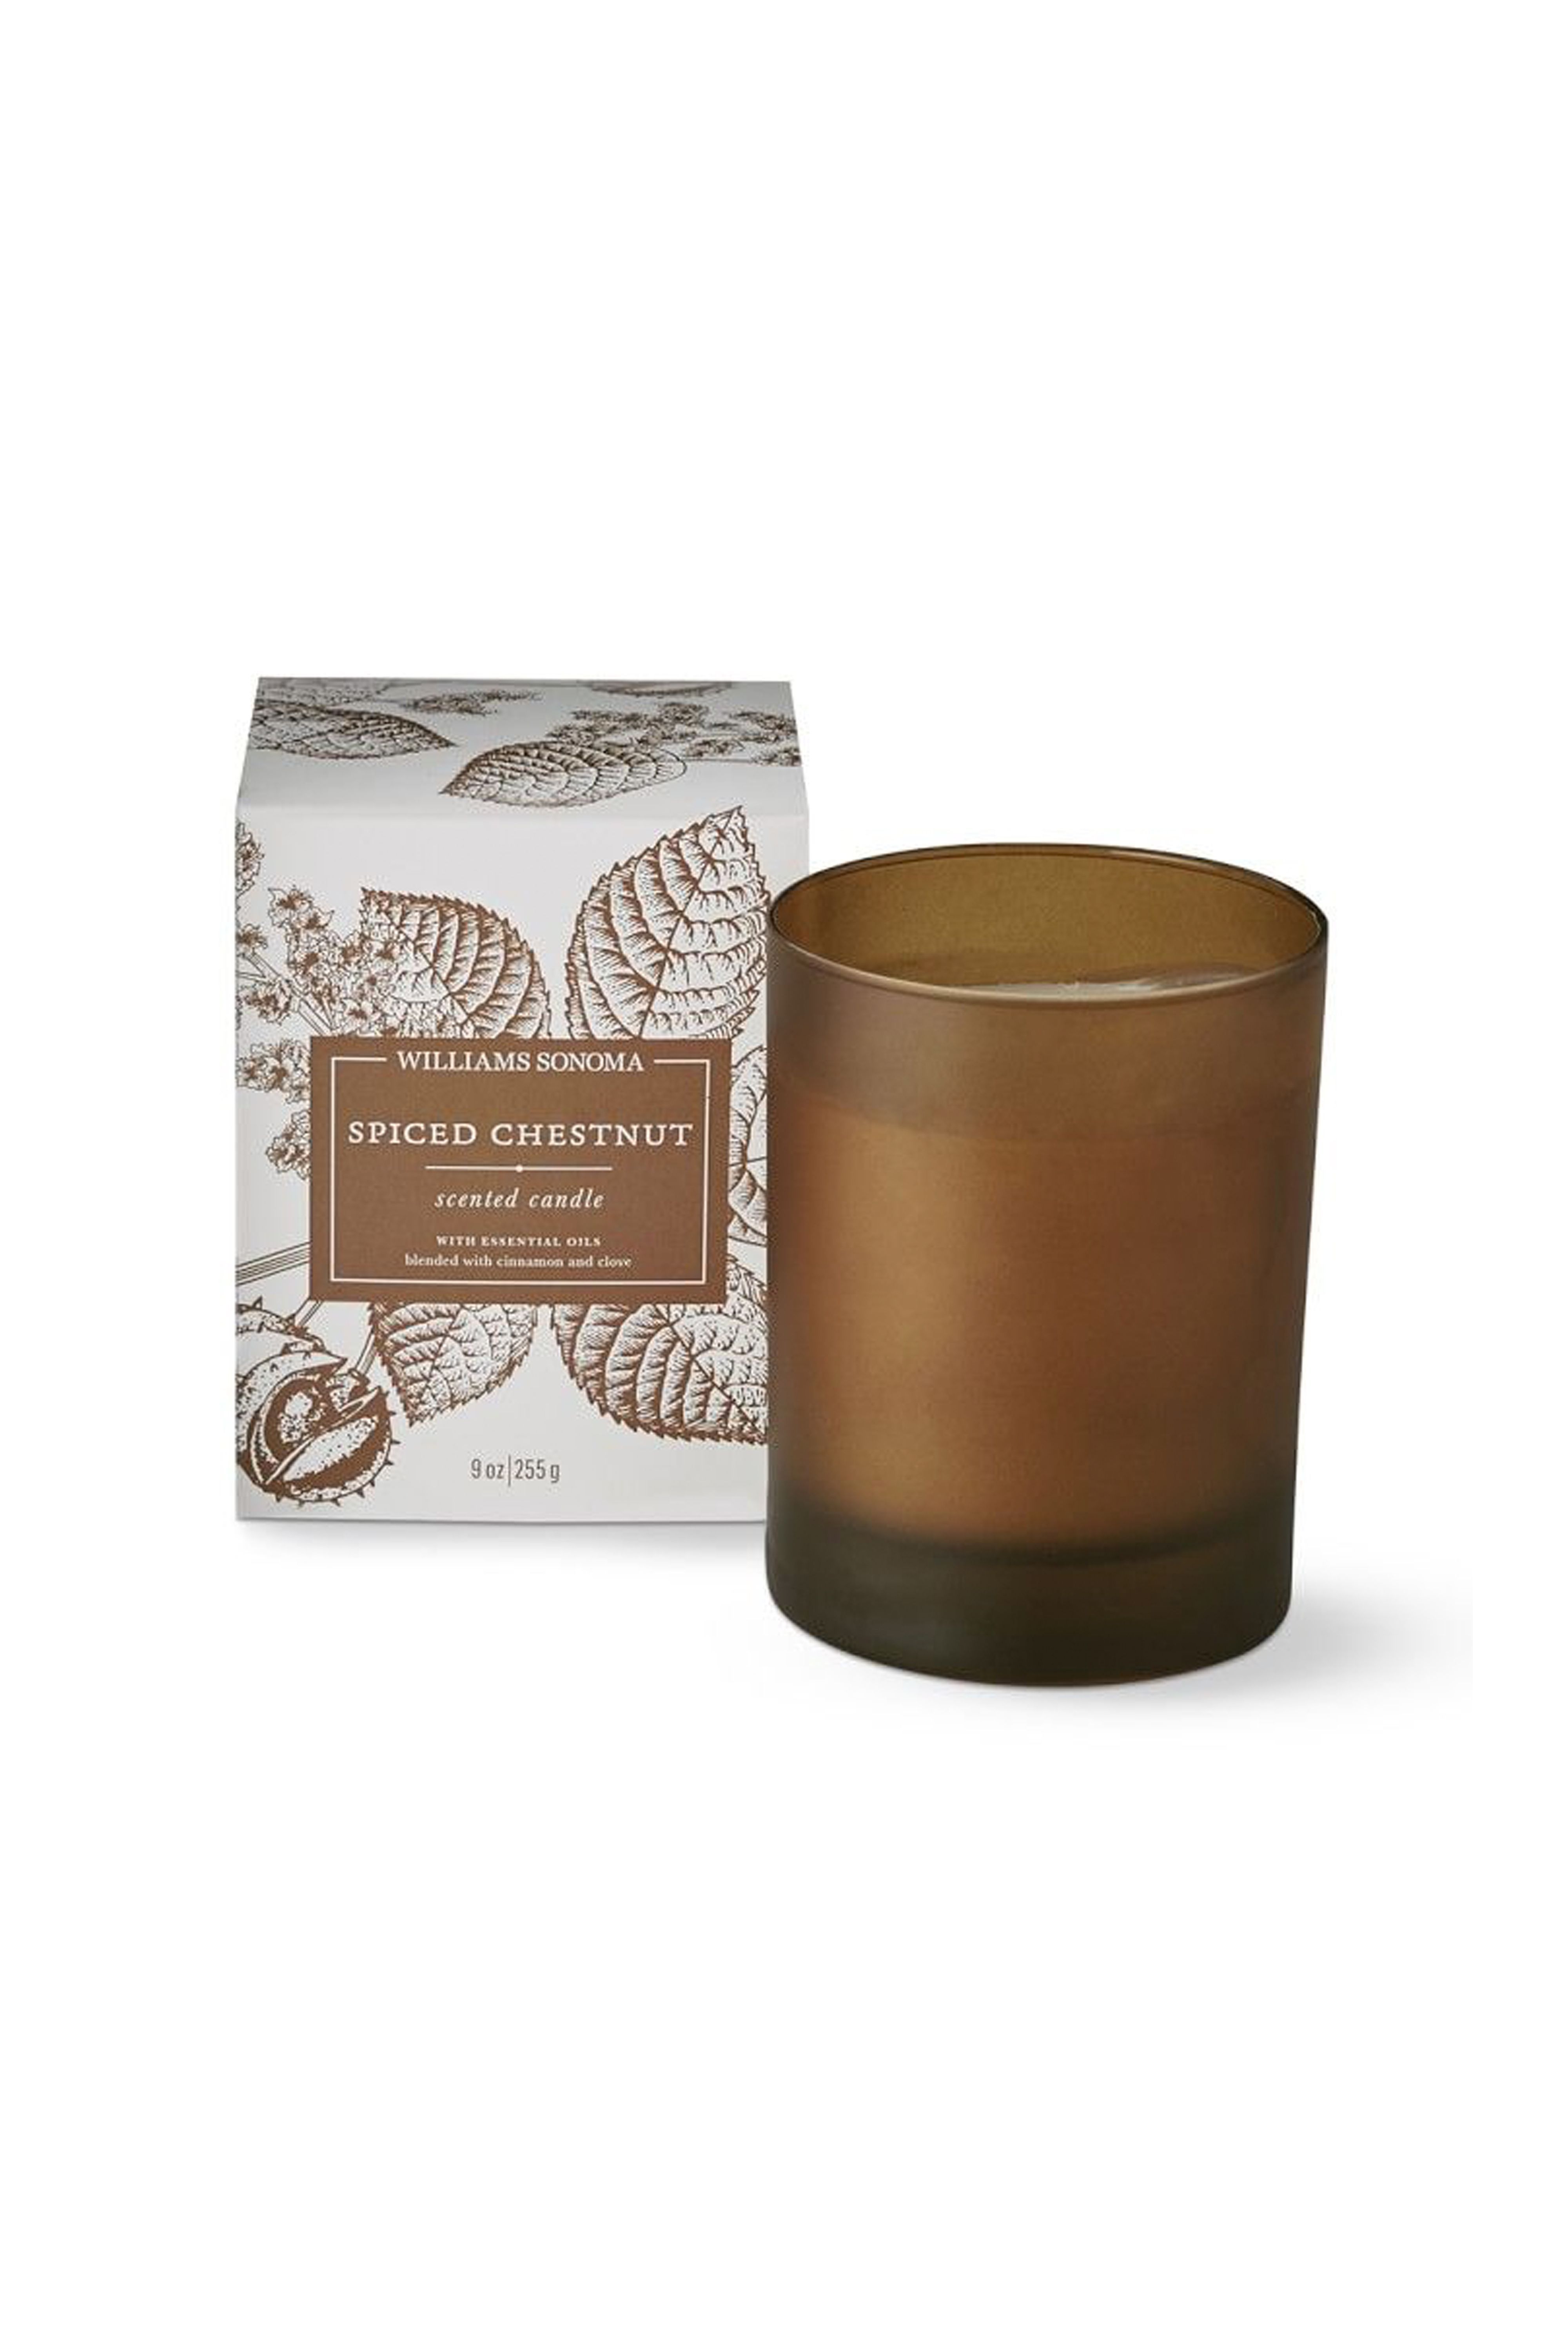 Williams Sonoma Spiced Chestnut Candle